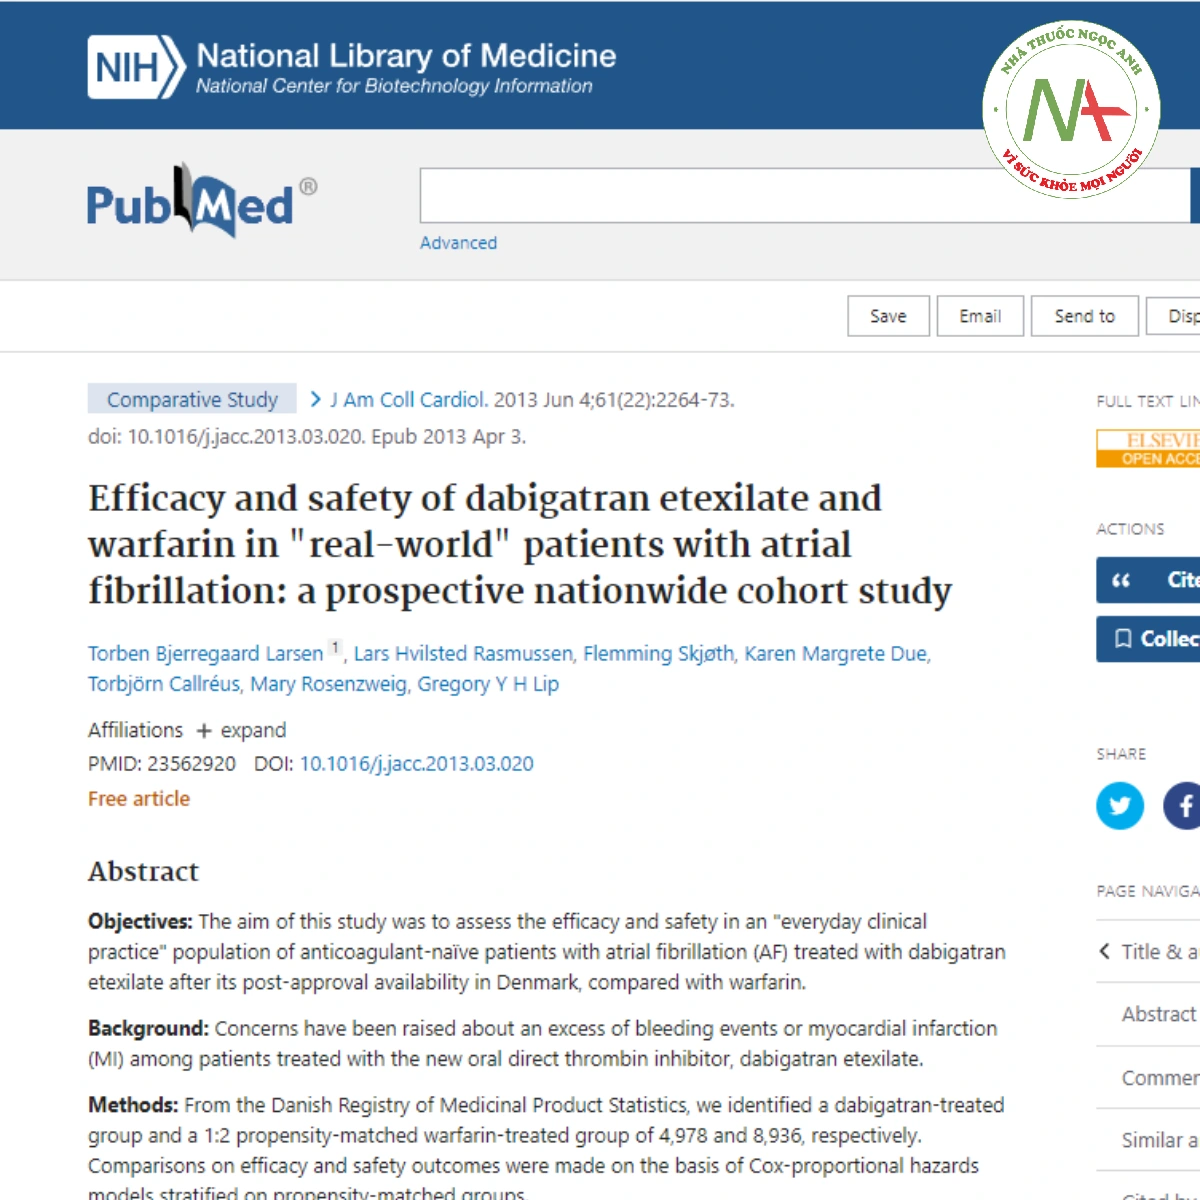 Efficacy and safety of dabigatran etexilate and warfarin in _real-world_ patients with atrial fibrillation_ a prospective nationwide cohort study